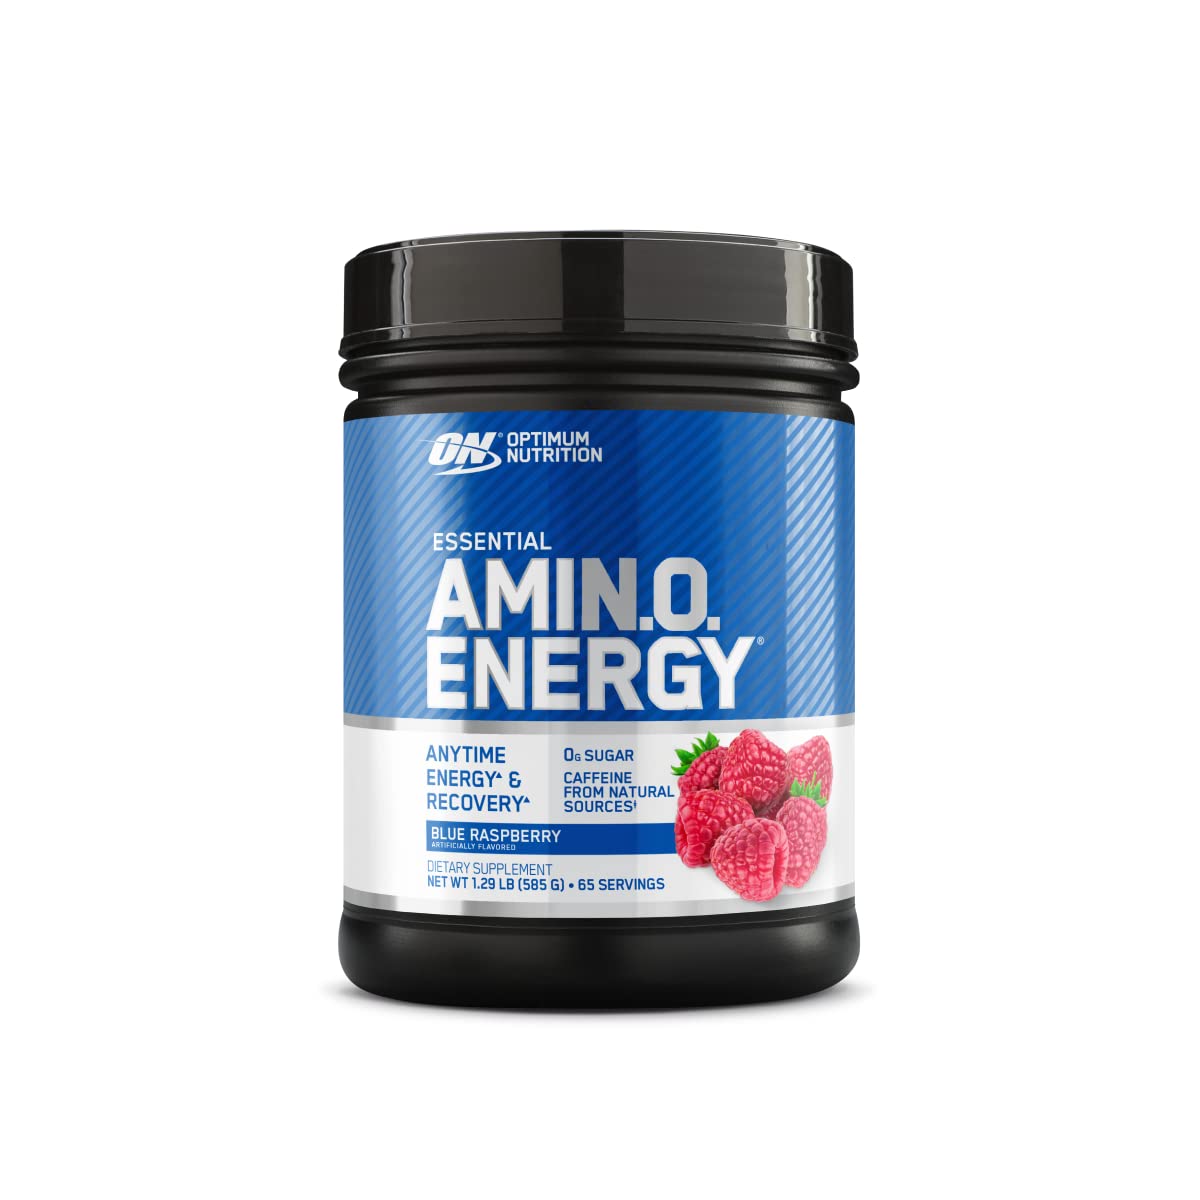 Optimum Nutrition Amino Energy - Pre Workout with Green Tea, BCAA, Amino Acids & Micronized Creatine Monohydrate Powder, Unflavored, Keto Friendly, 120 Servings (Packaging May Vary)